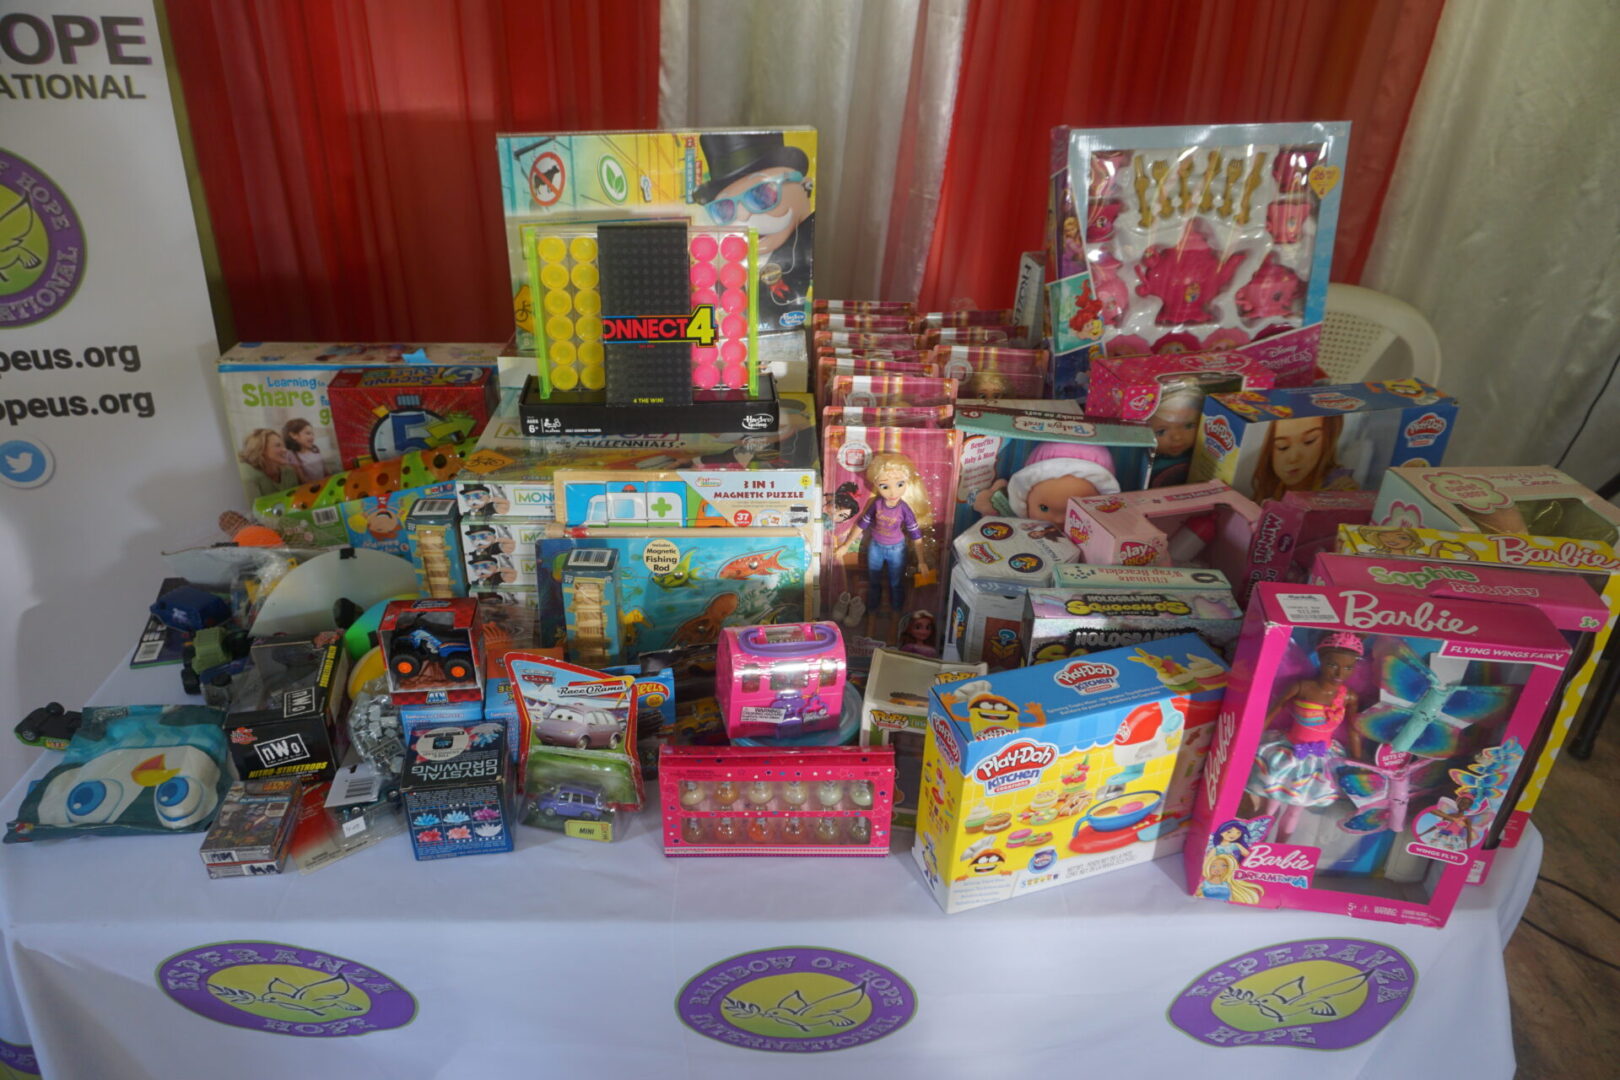 A table with Esperanza-Hope logos full of toys (different angle)